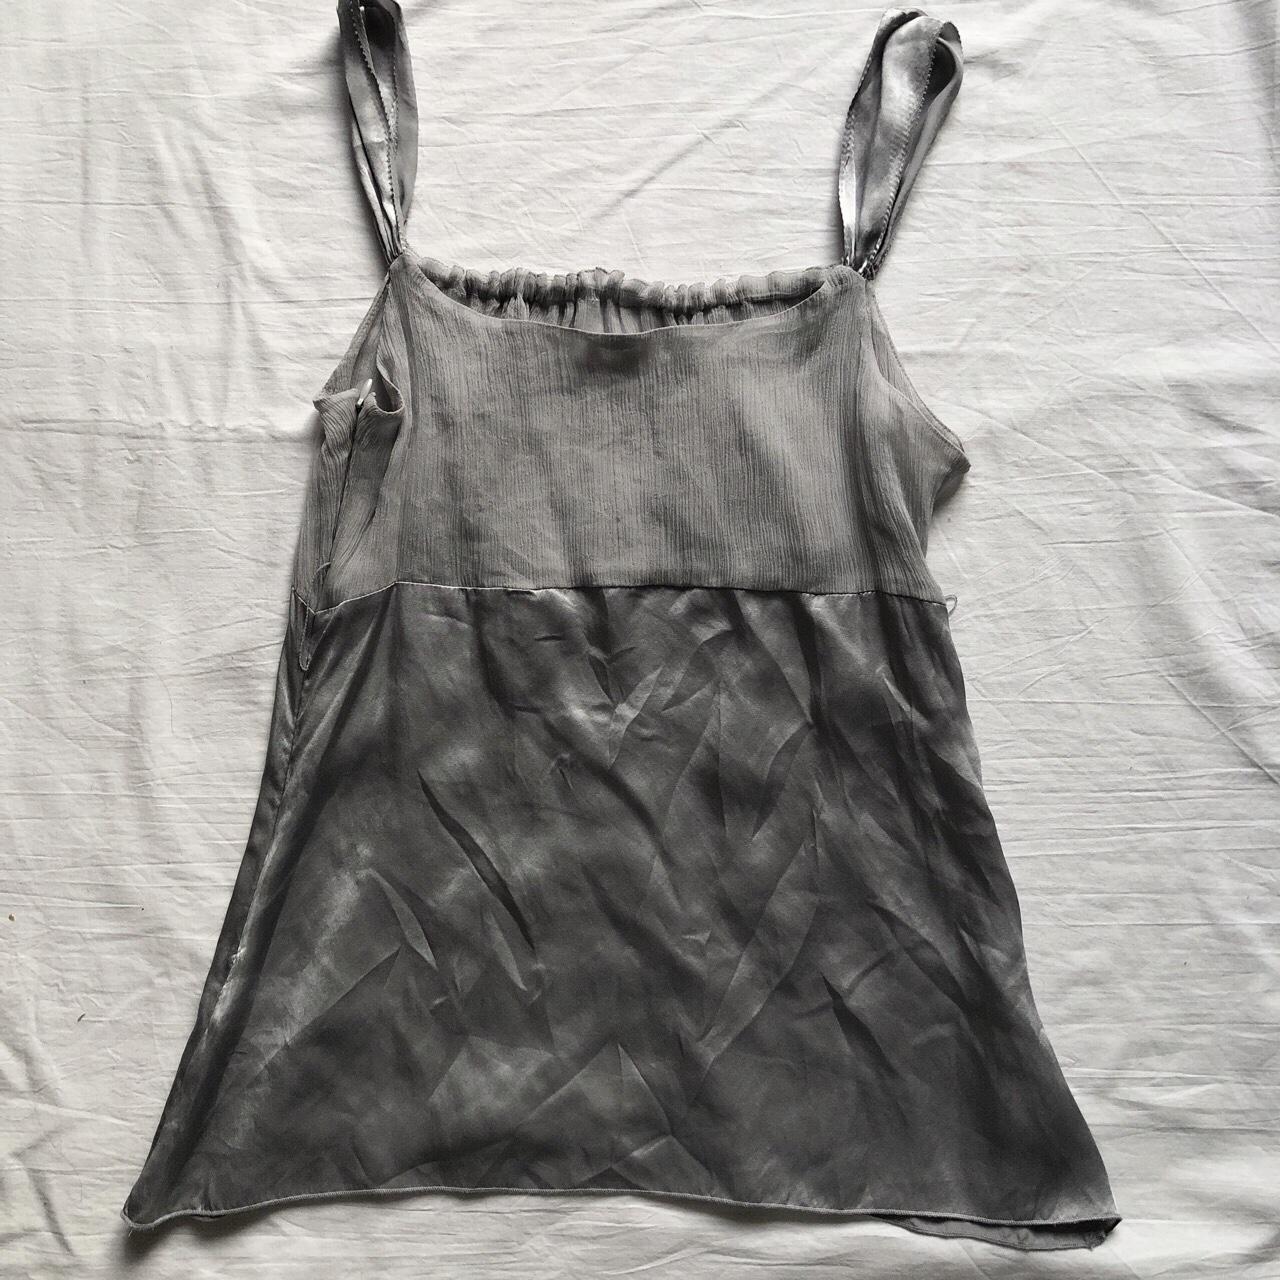 Product Image 4 - Intimissimi silver top

No size or